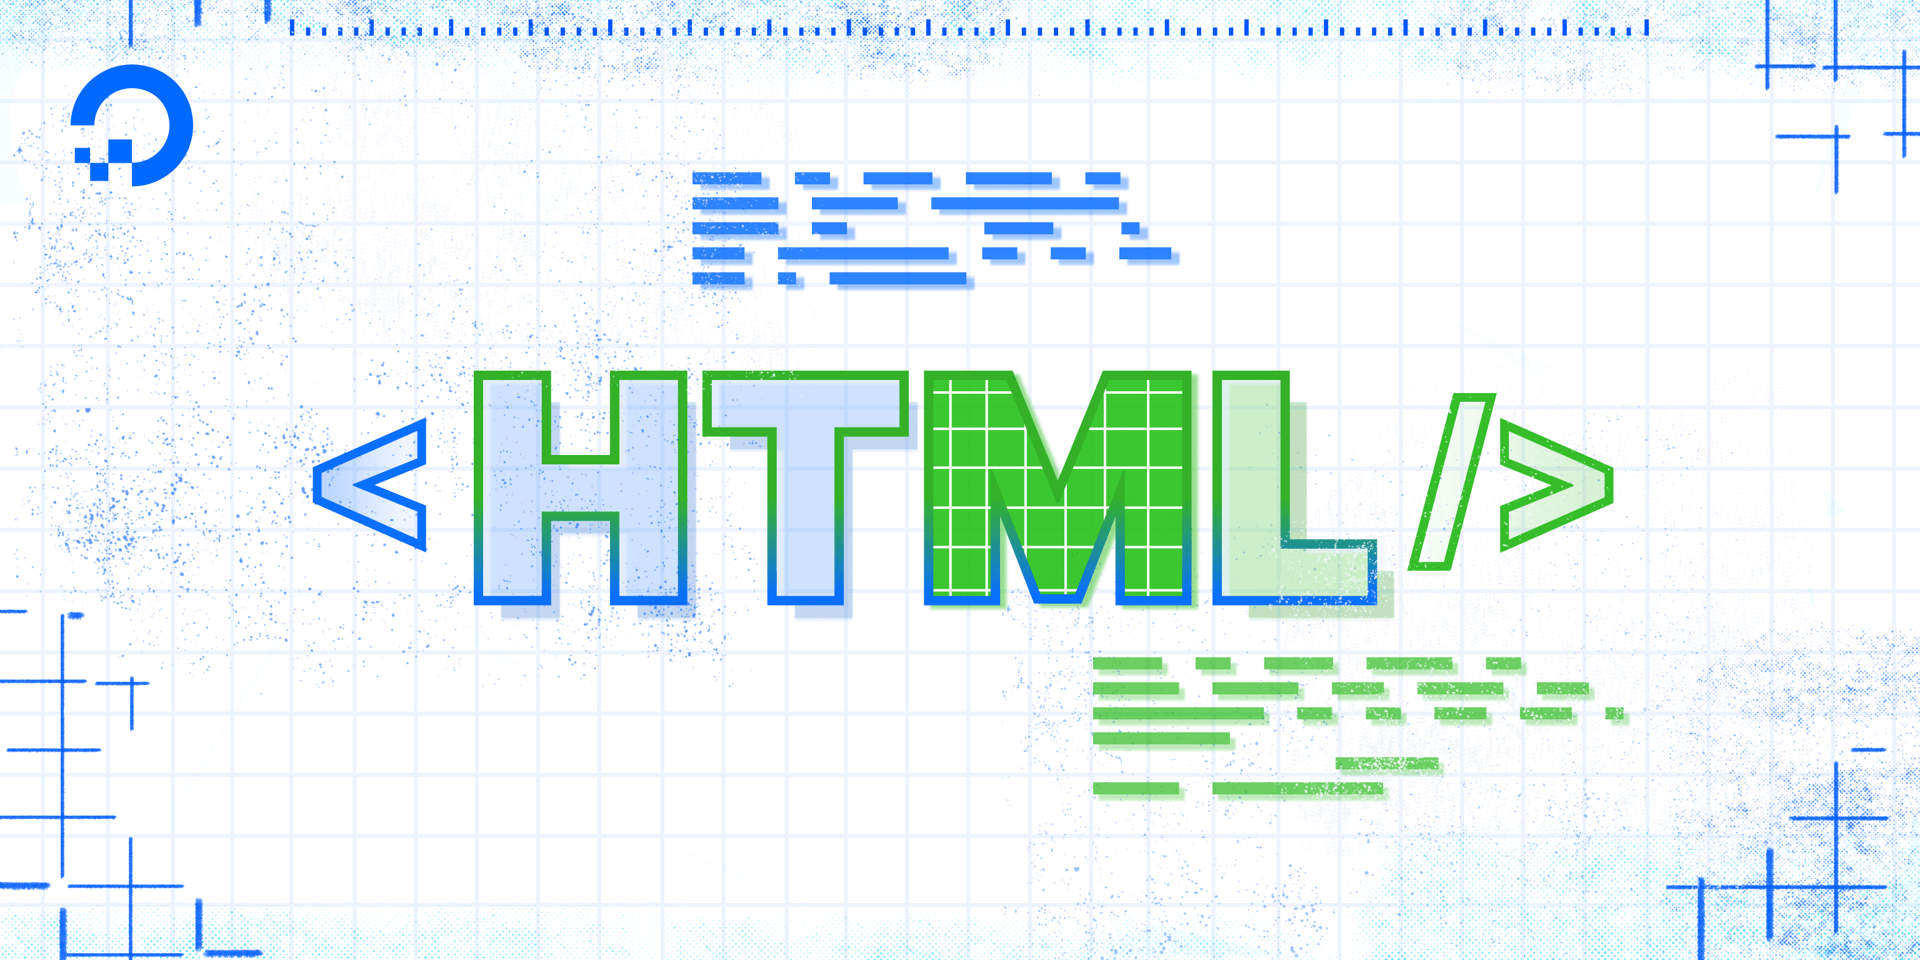 How To Use a <div>, the HTML Content Division Element